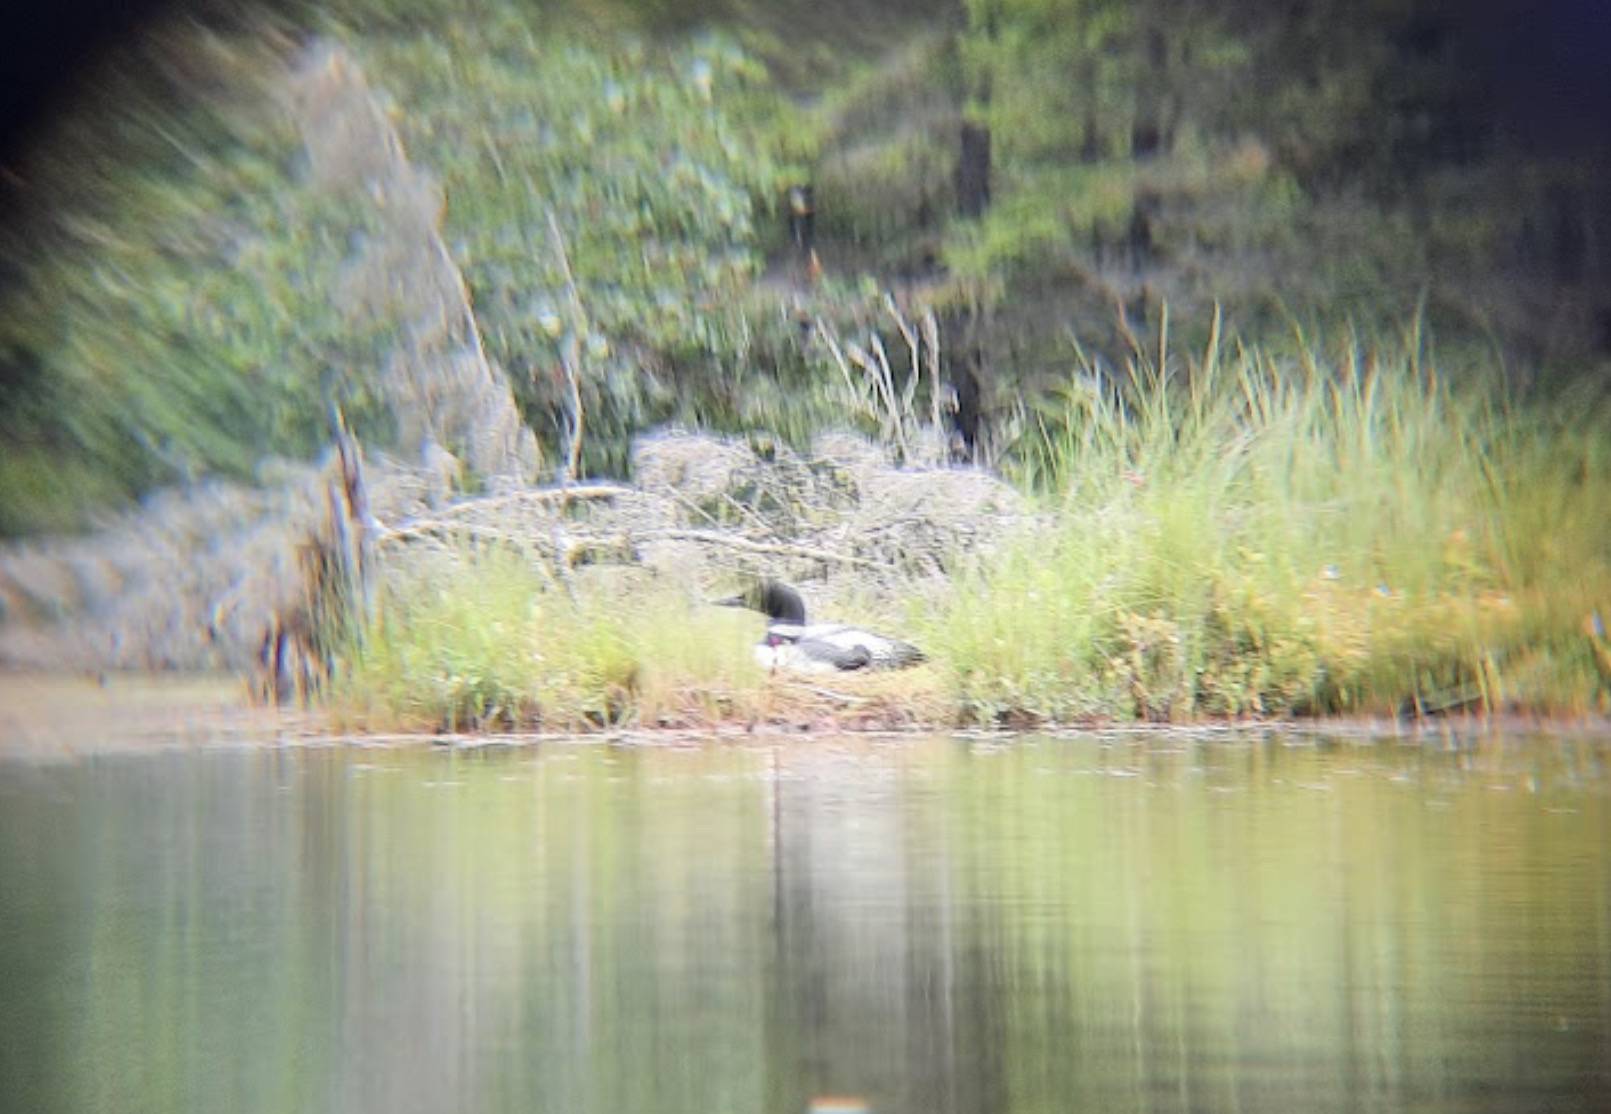 An adult loon sitting on its nest, as seen through binoculars